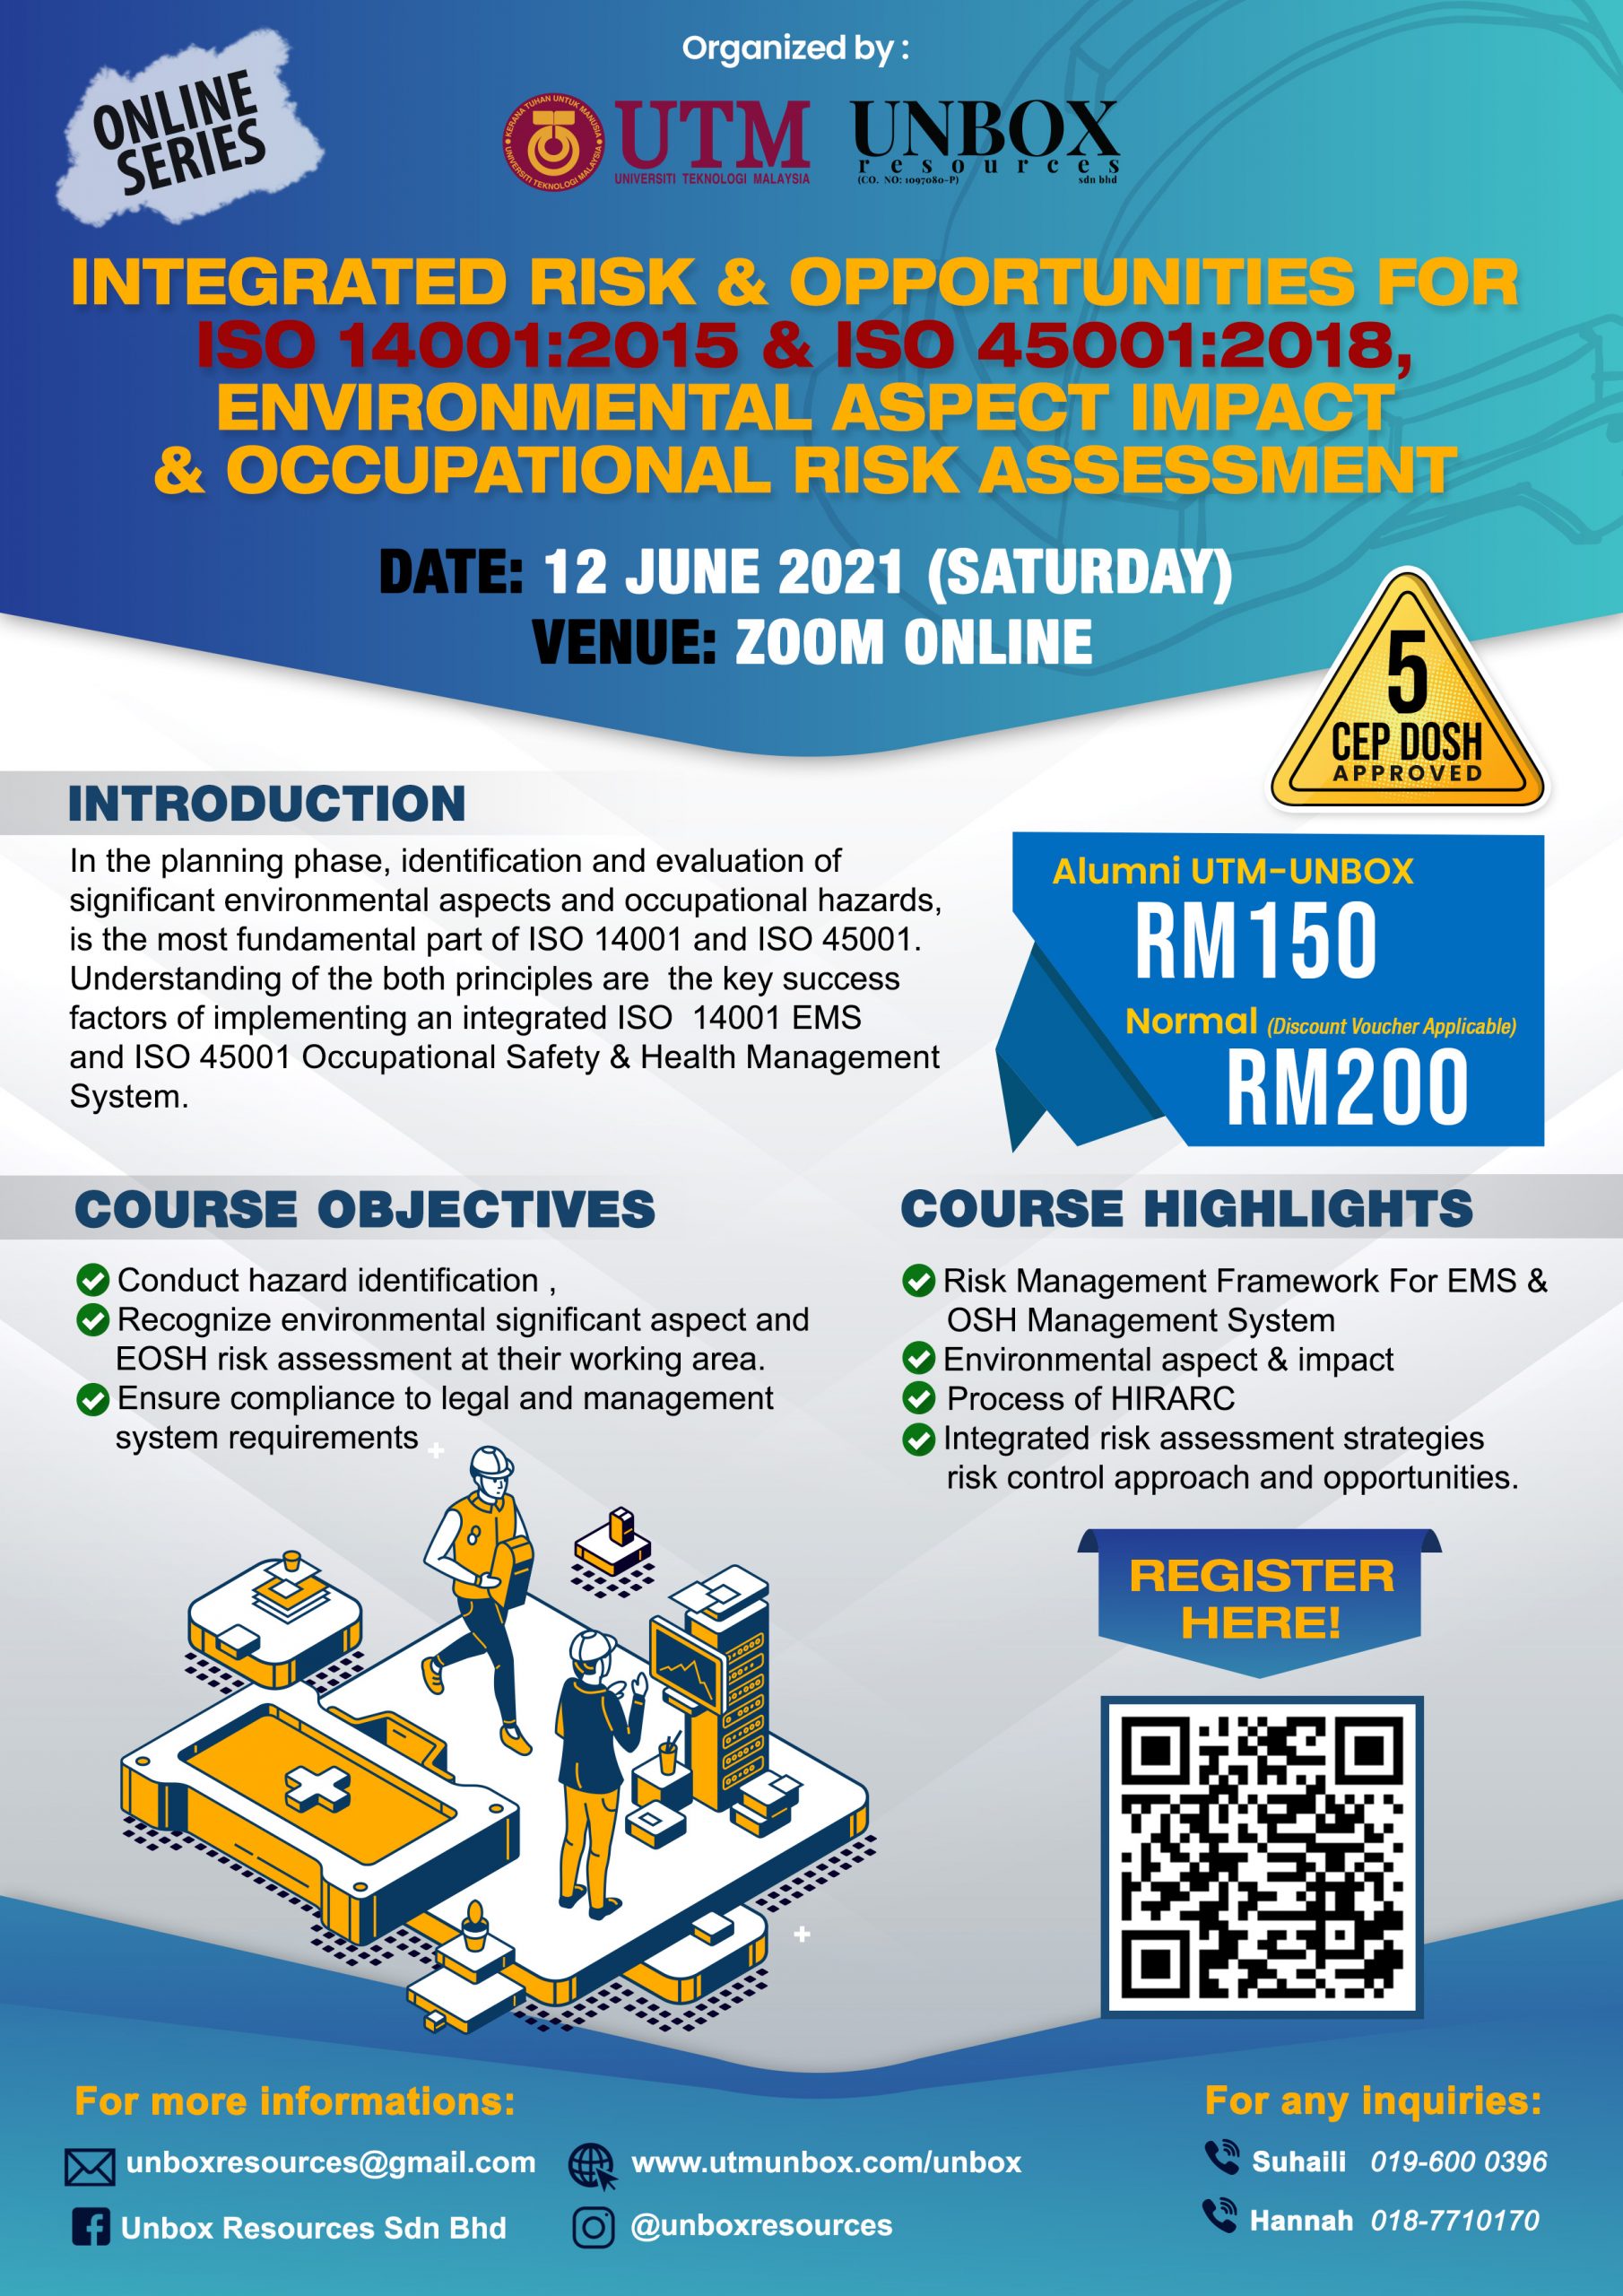 You are currently viewing INTEGRATED RISK & OPPORTUNITIES FOR  ISO 14001:2015 & ISO 45001:2018, ENVIRONMENTAL ASPECT IMPACT & OCCUPATIONAL RISK ASSESSMENT